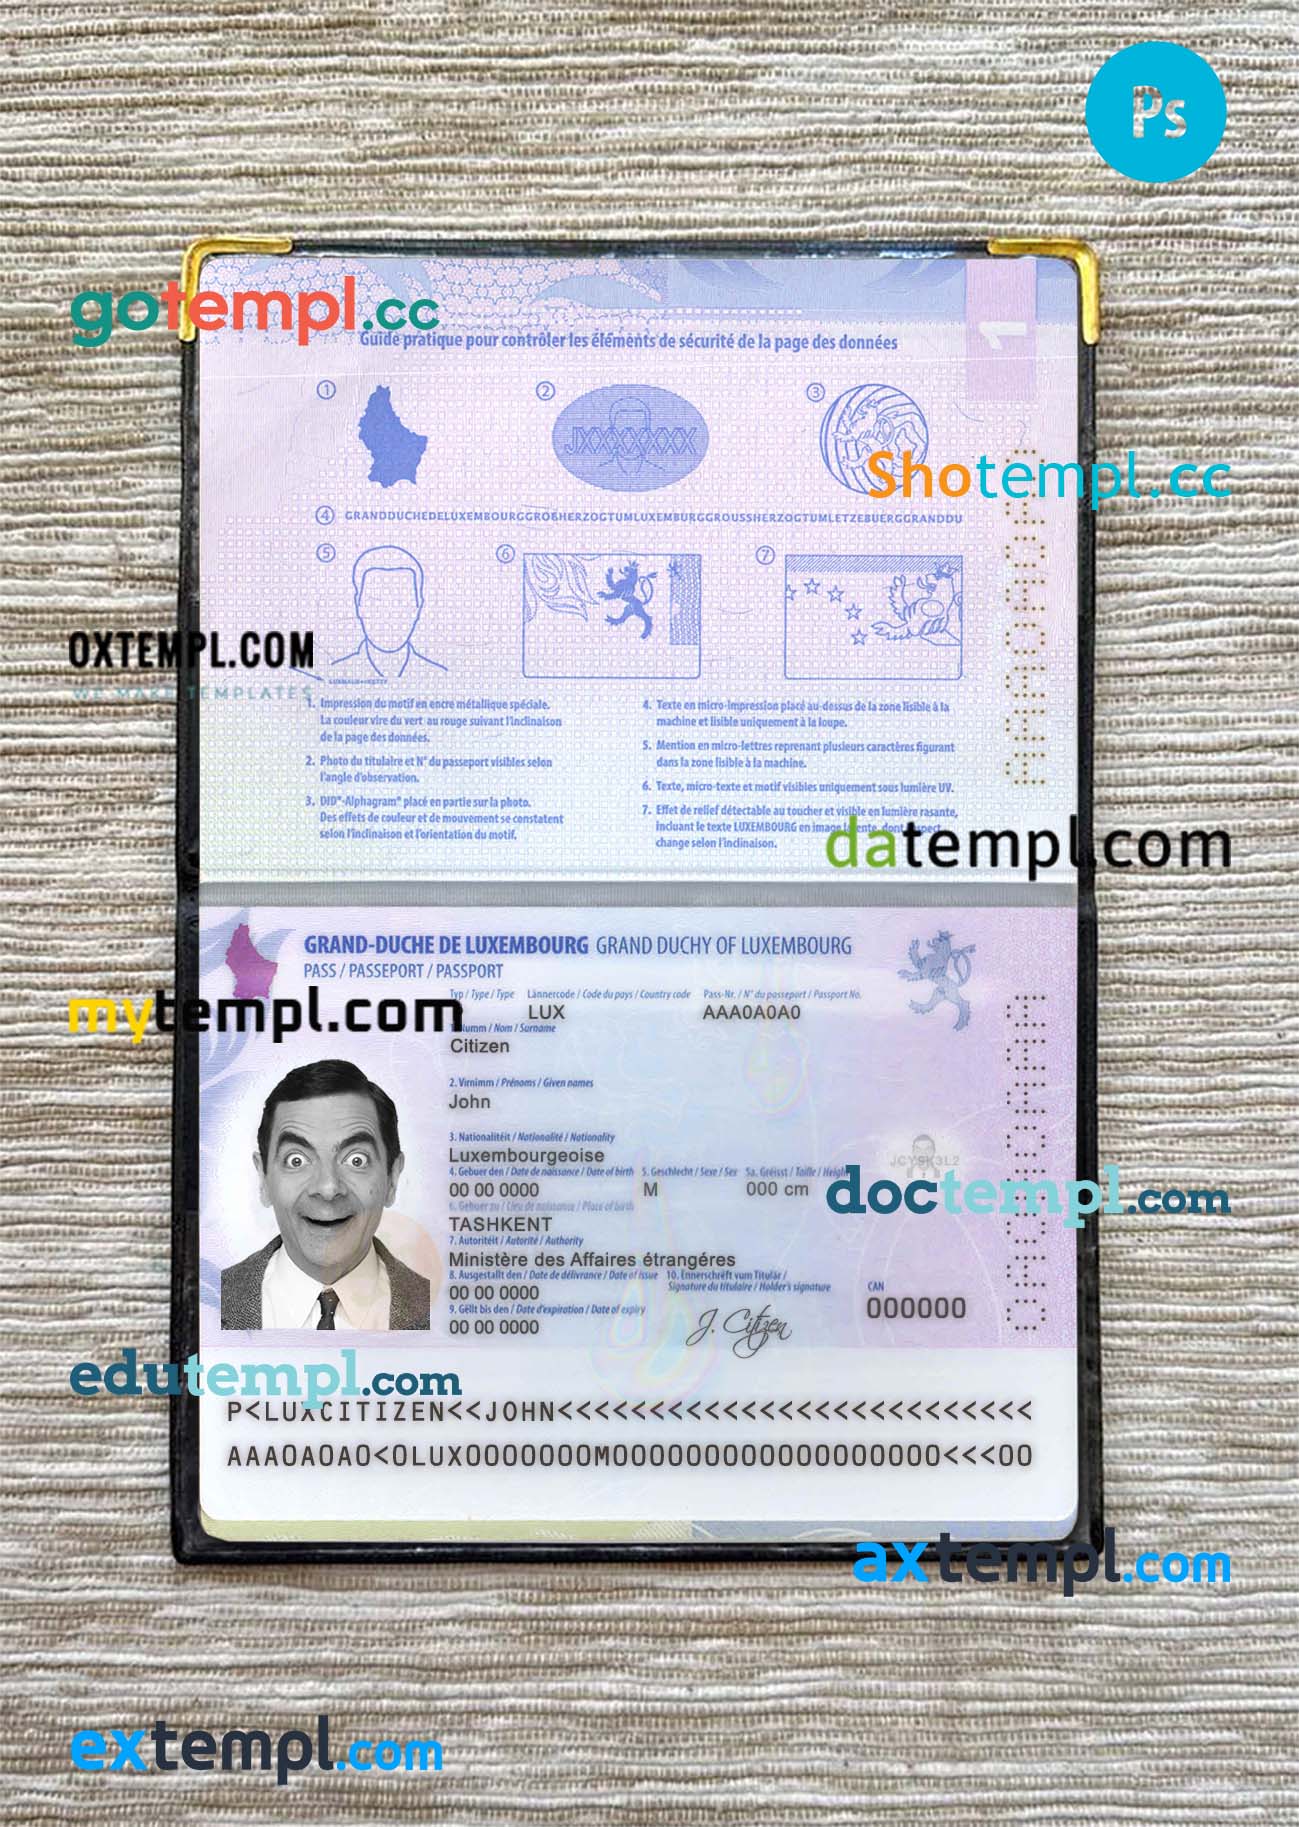 USA Georgia driving license PSD files, scan look and photographed image, 2 in 1 (2017-2019), under 21